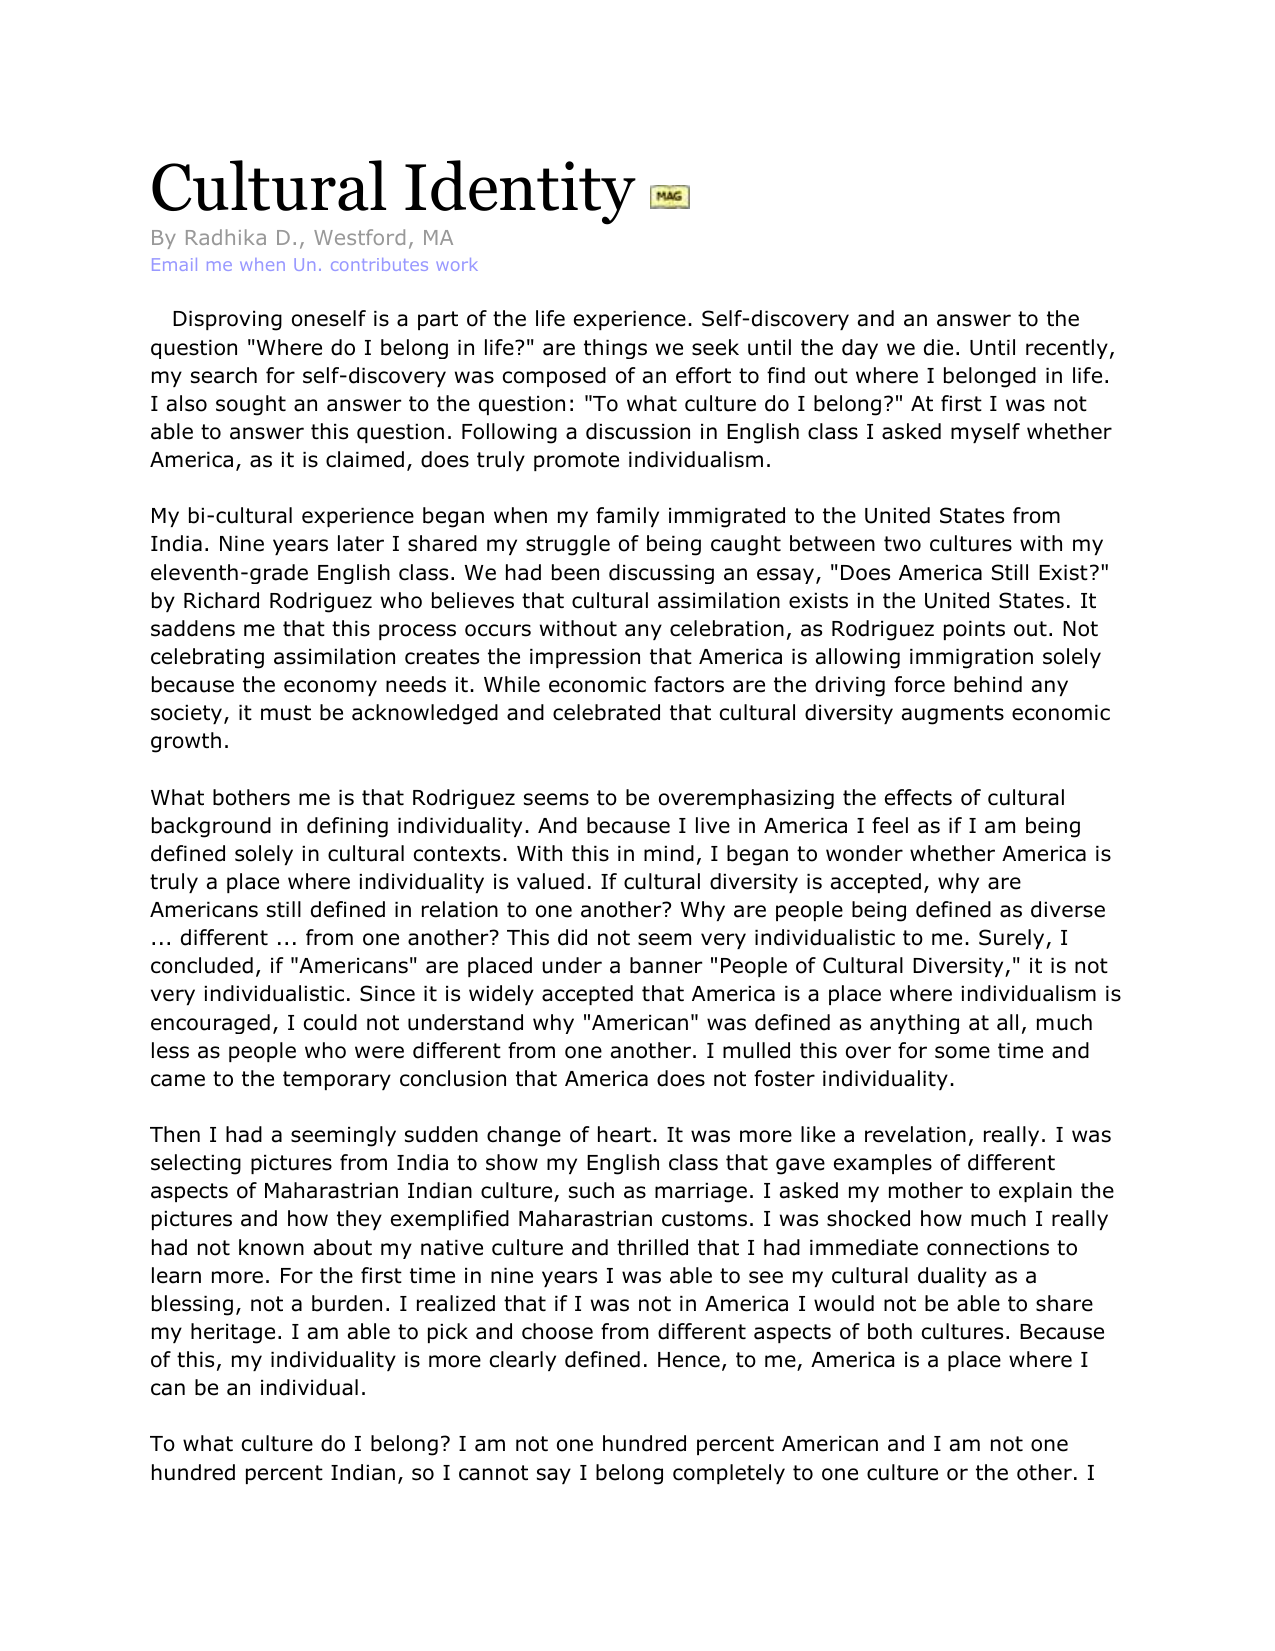 college essay examples about culture